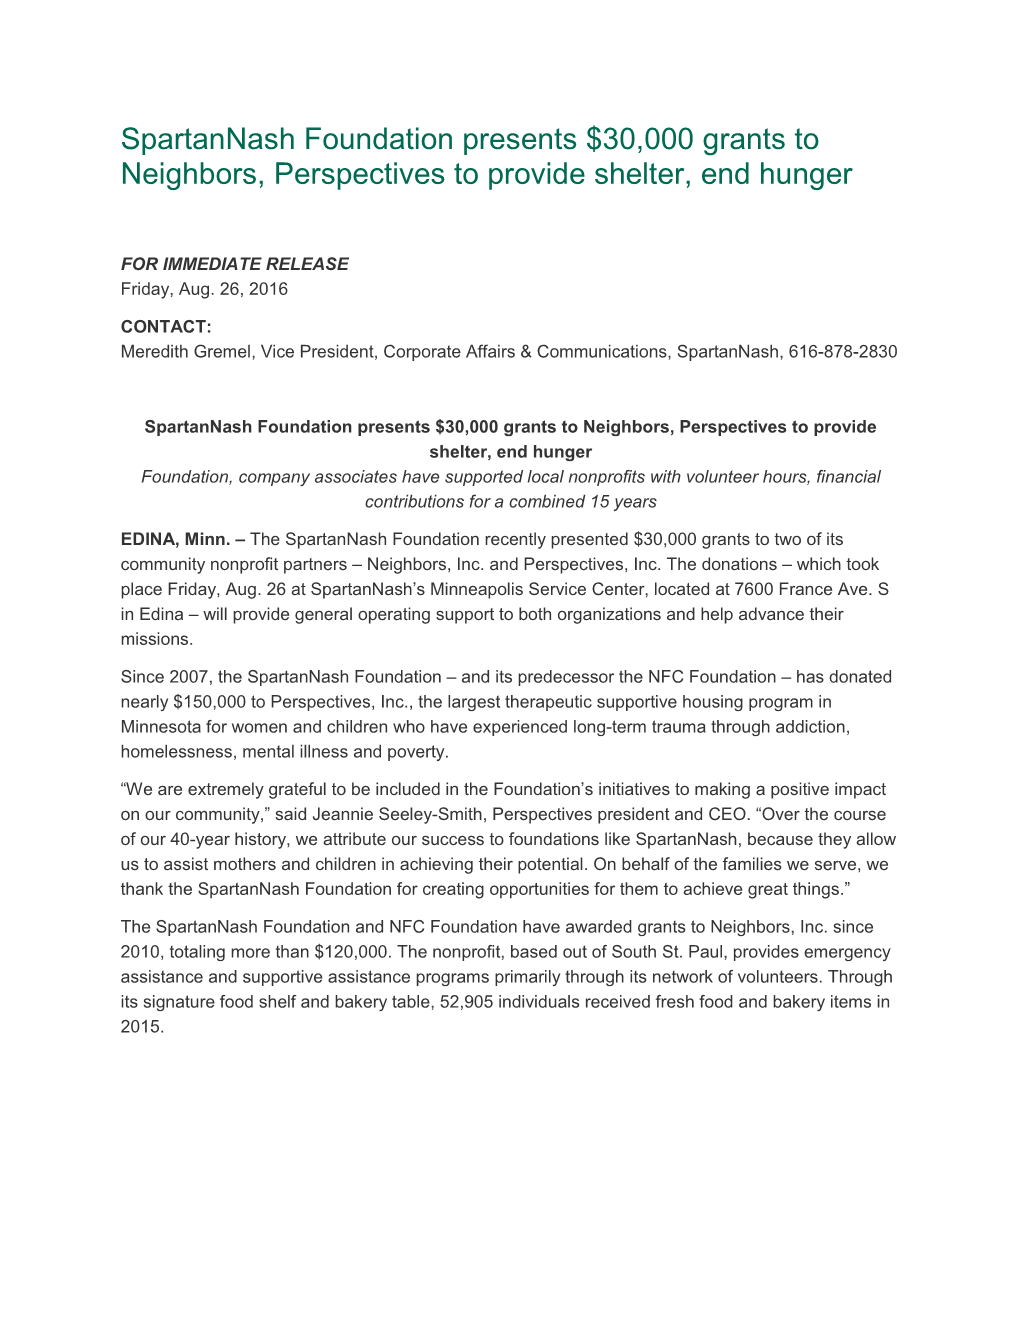 Spartannash Foundation Presents $30,000 Grants to Neighbors, Perspectives to Provide Shelter, End Hunger